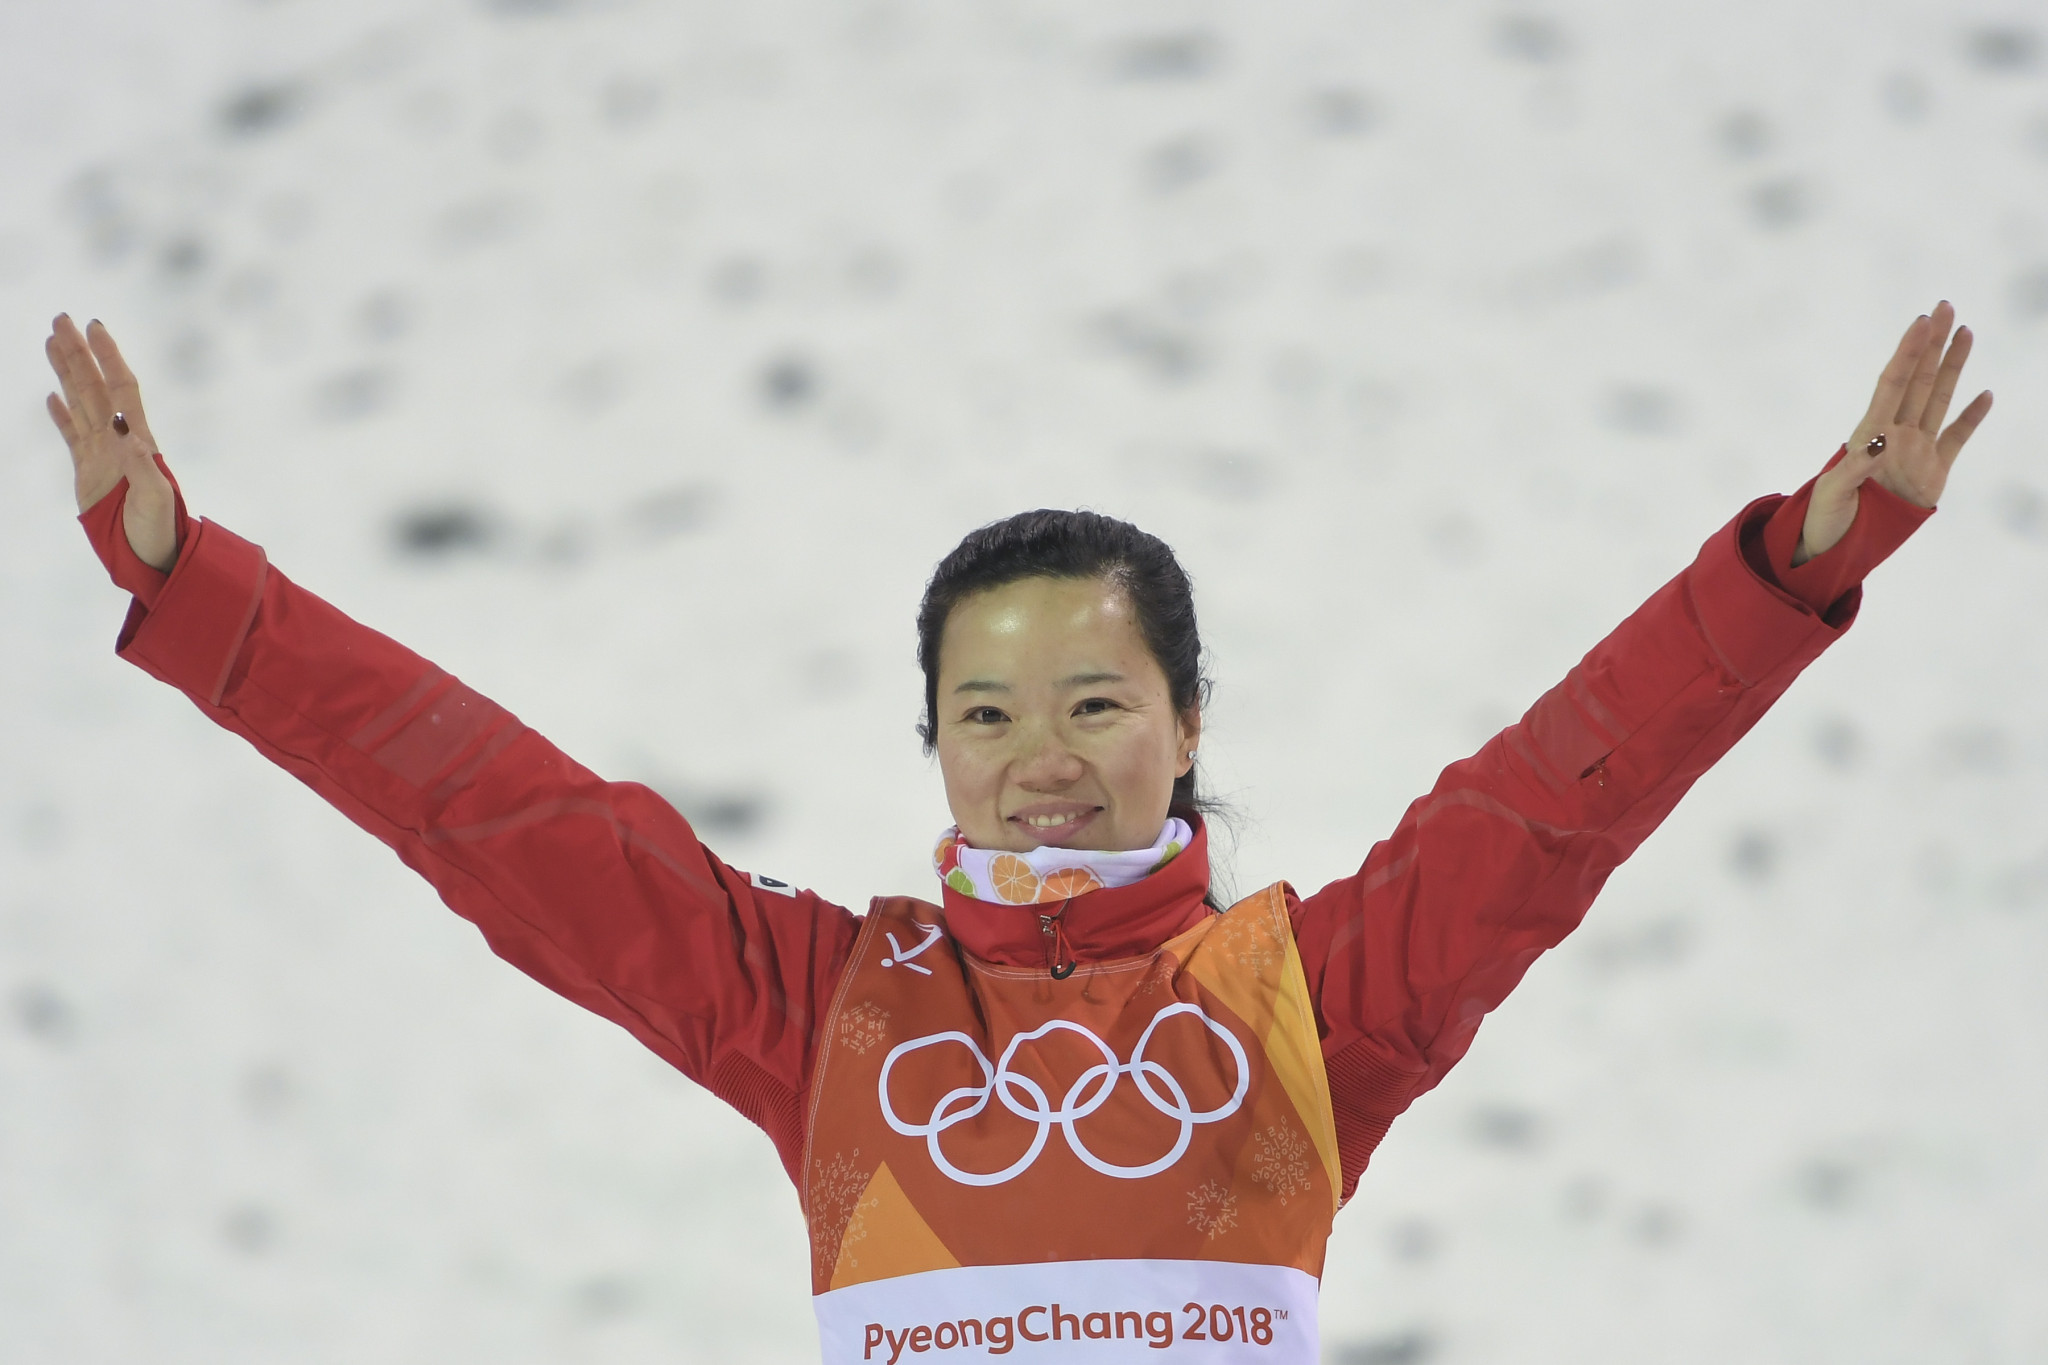 Zhang Xin of China finished in second place ©Getty Images